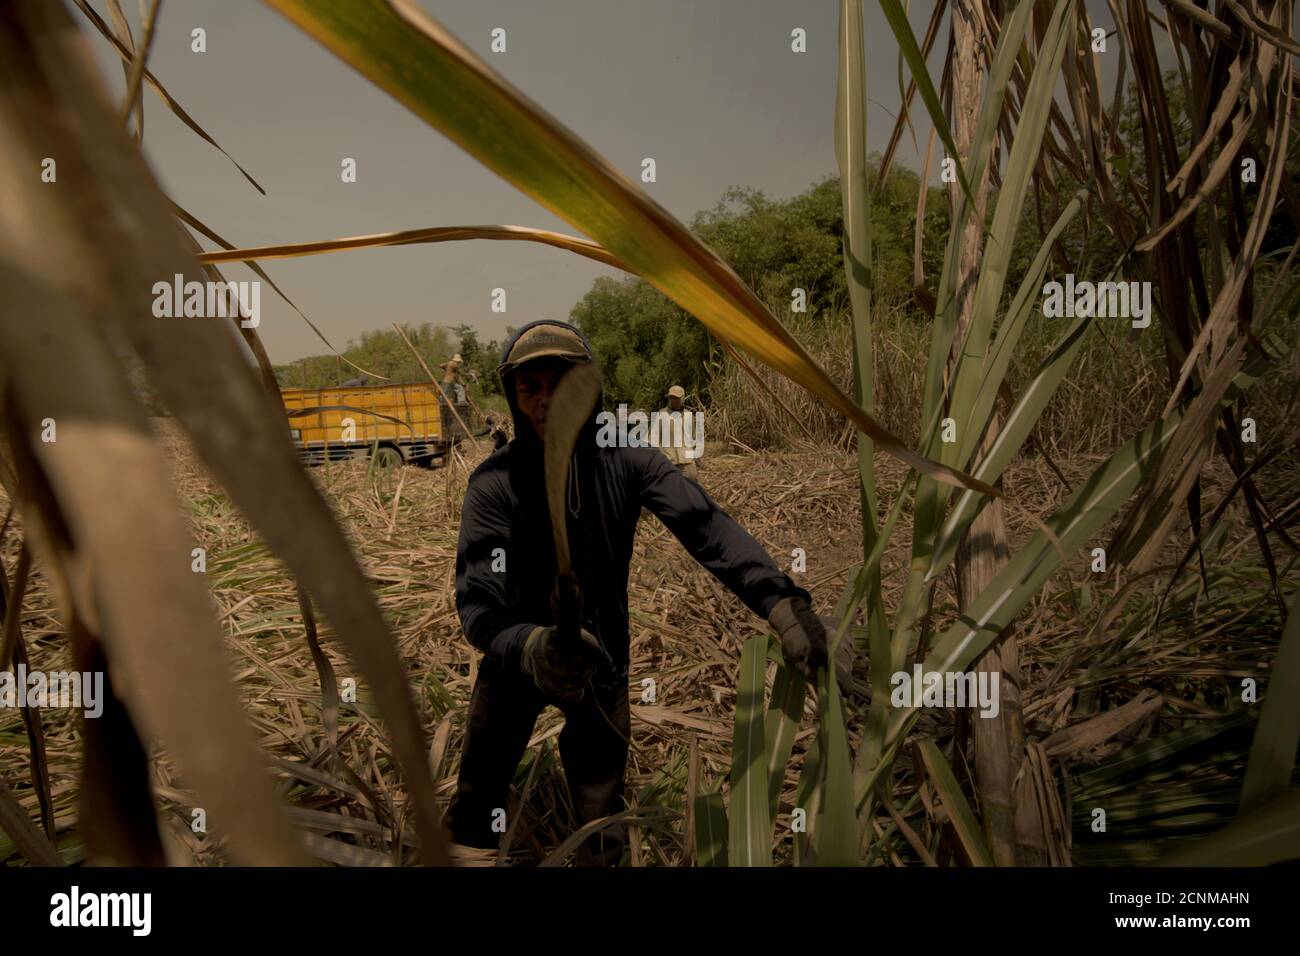 Workers harvesting sugarcane on a plantation area managed to supply the processing industry at Tasikmadu Sugar Mill in Central Java. © Reynold Sumayku Stock Photo